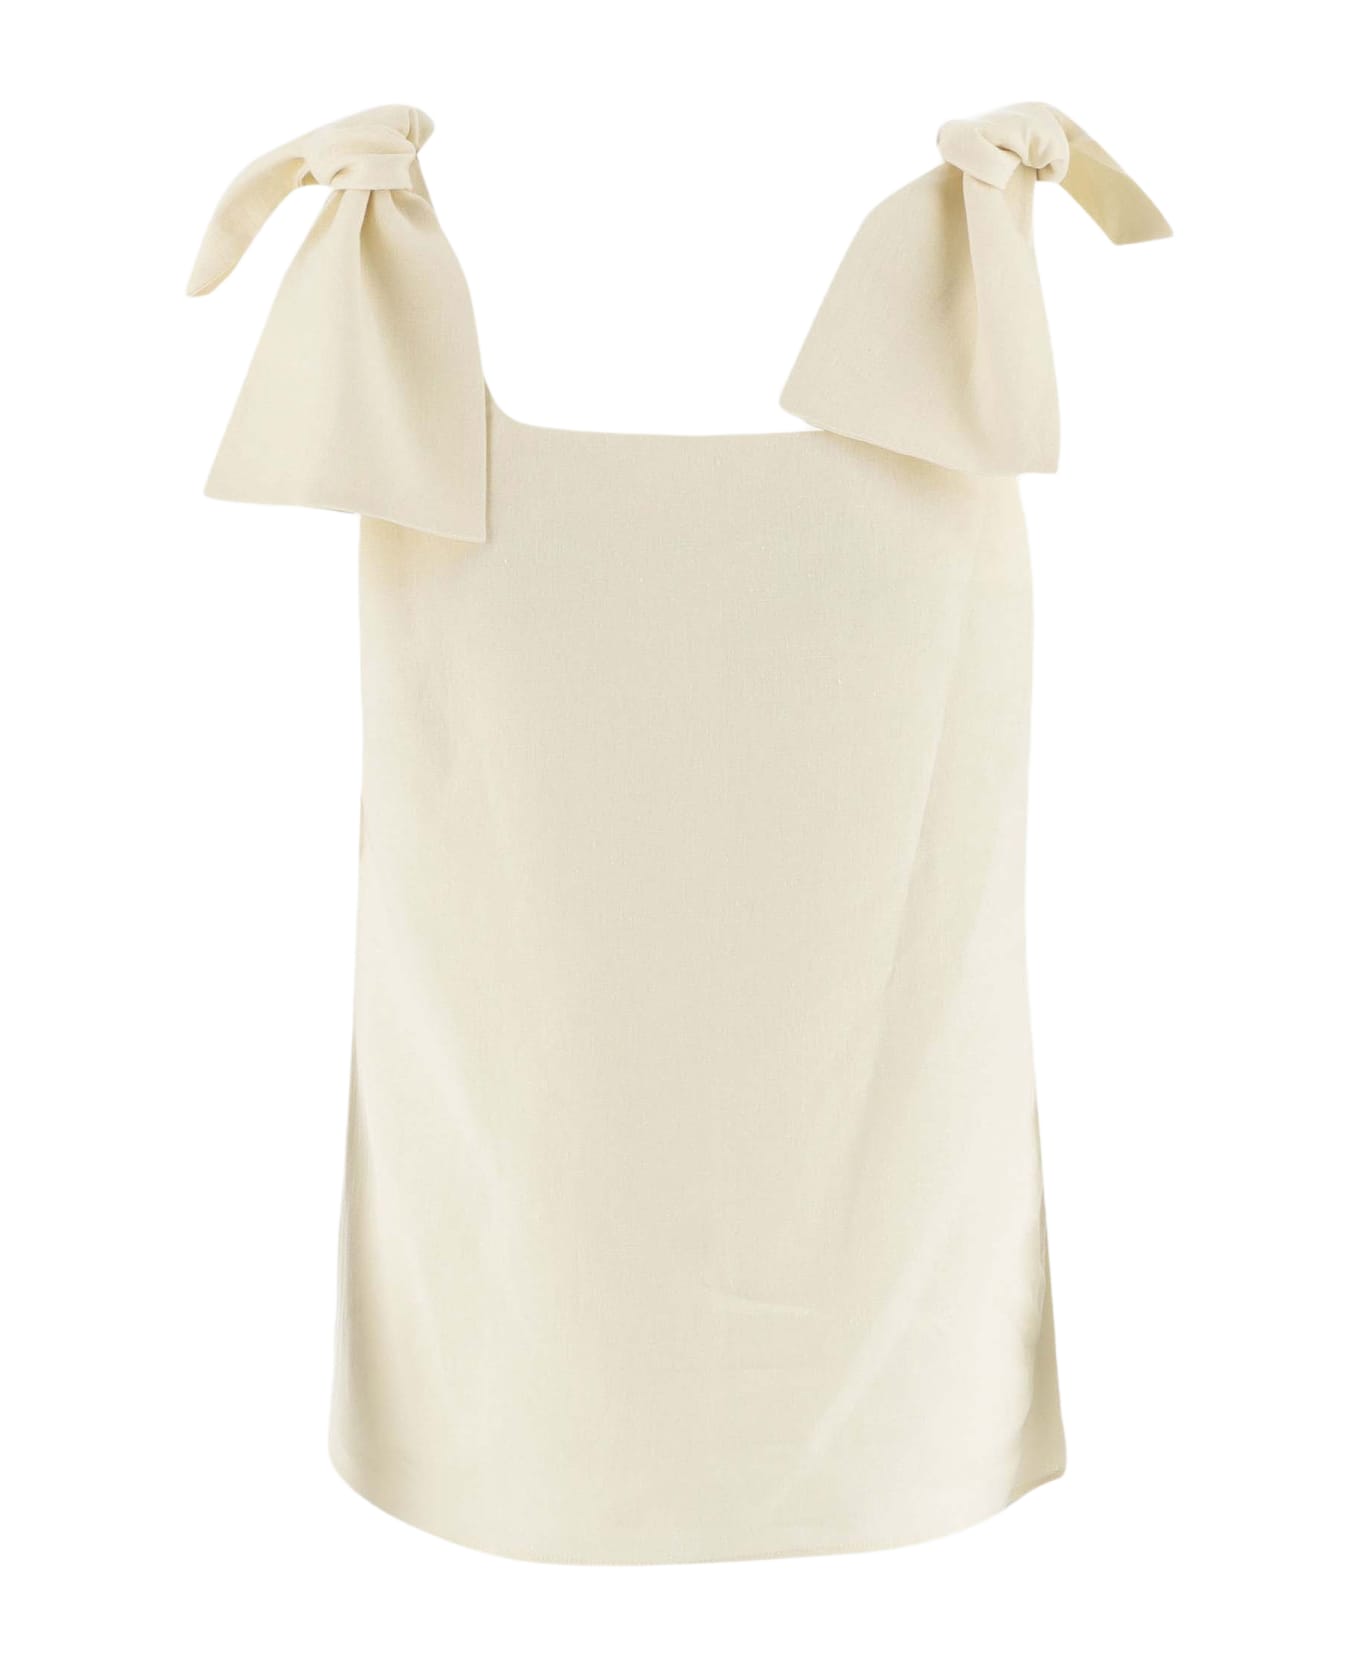 Chloé Tank Top With Bow On The Straps - White